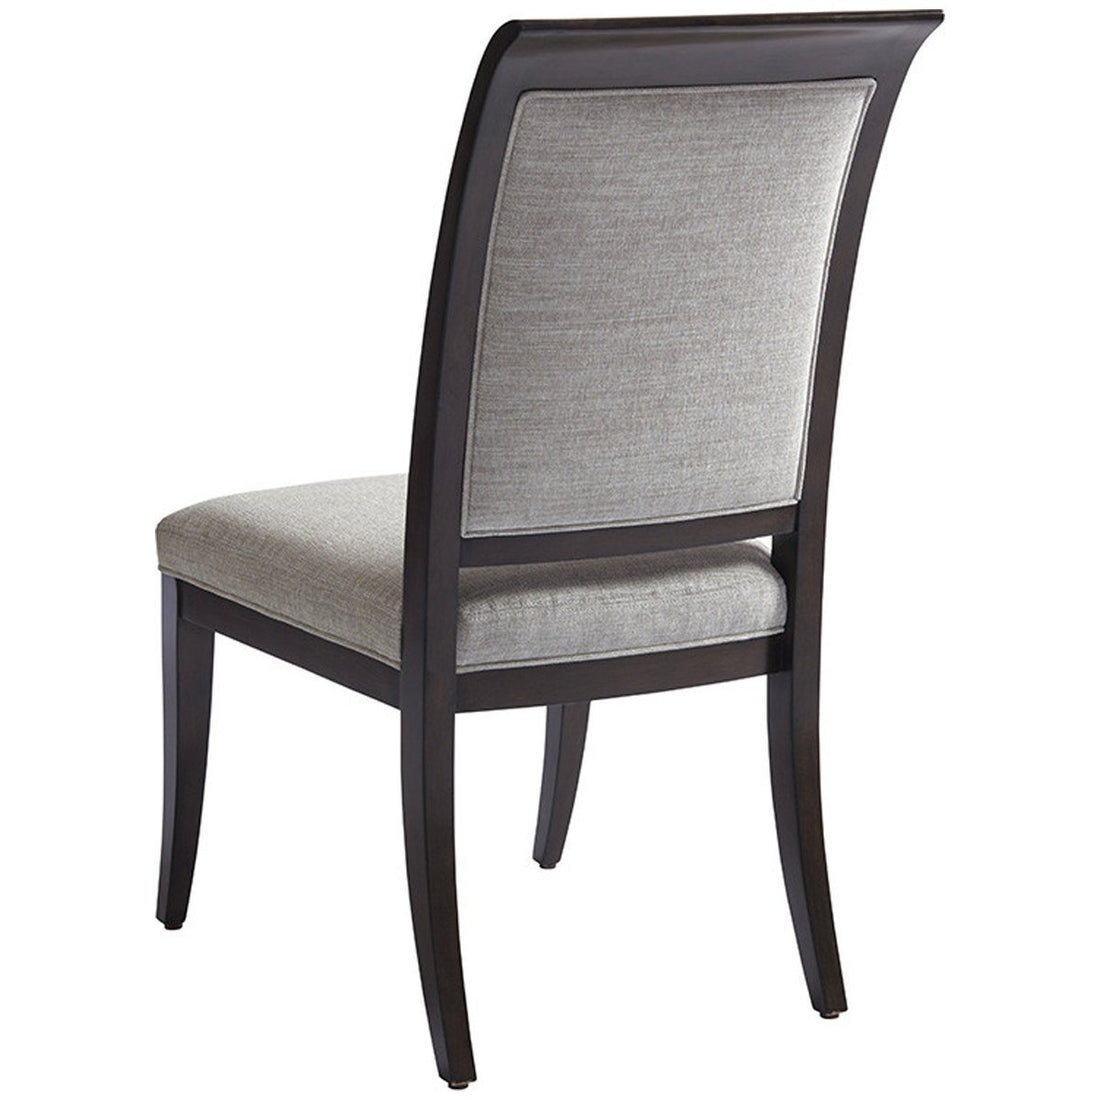 Lexington Barclay Butera Brentwood Kathryn Upholstered Side Chair